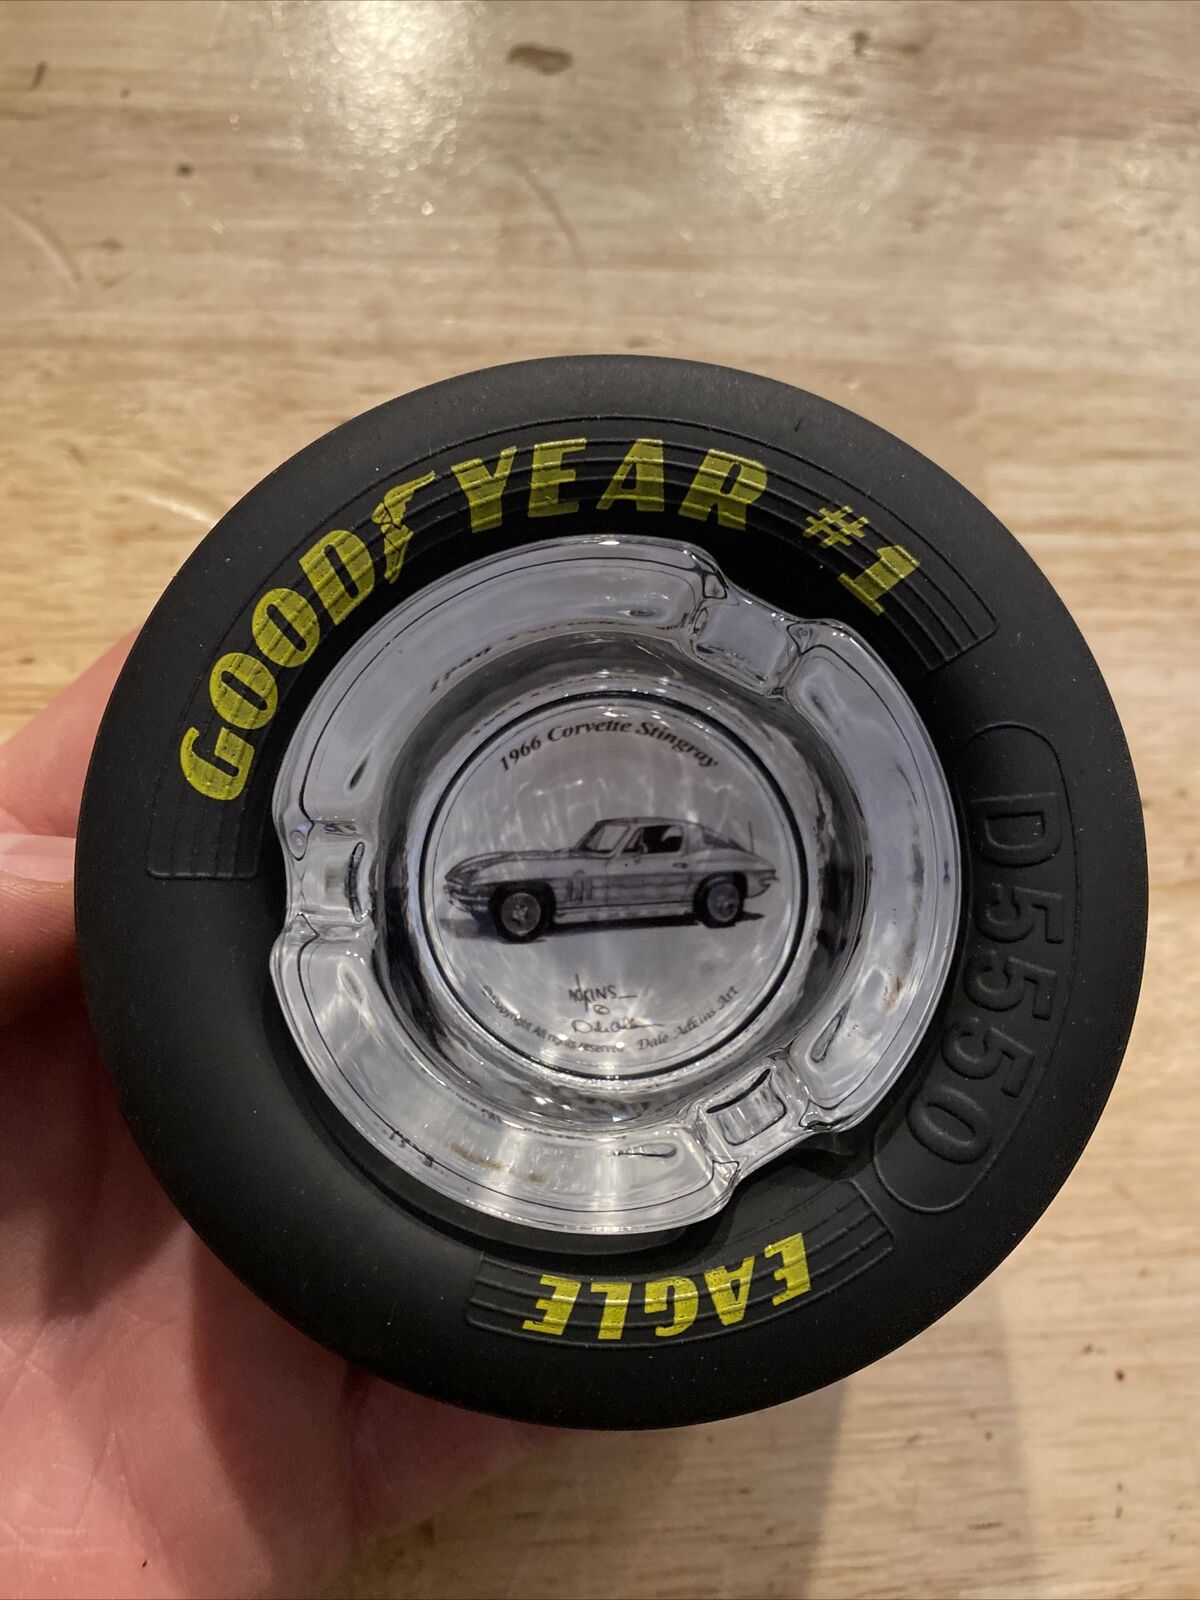 Goodyear Tires Ashtray Corvette NASCAR Glass on Rubber Chevrolet Chevy Collector